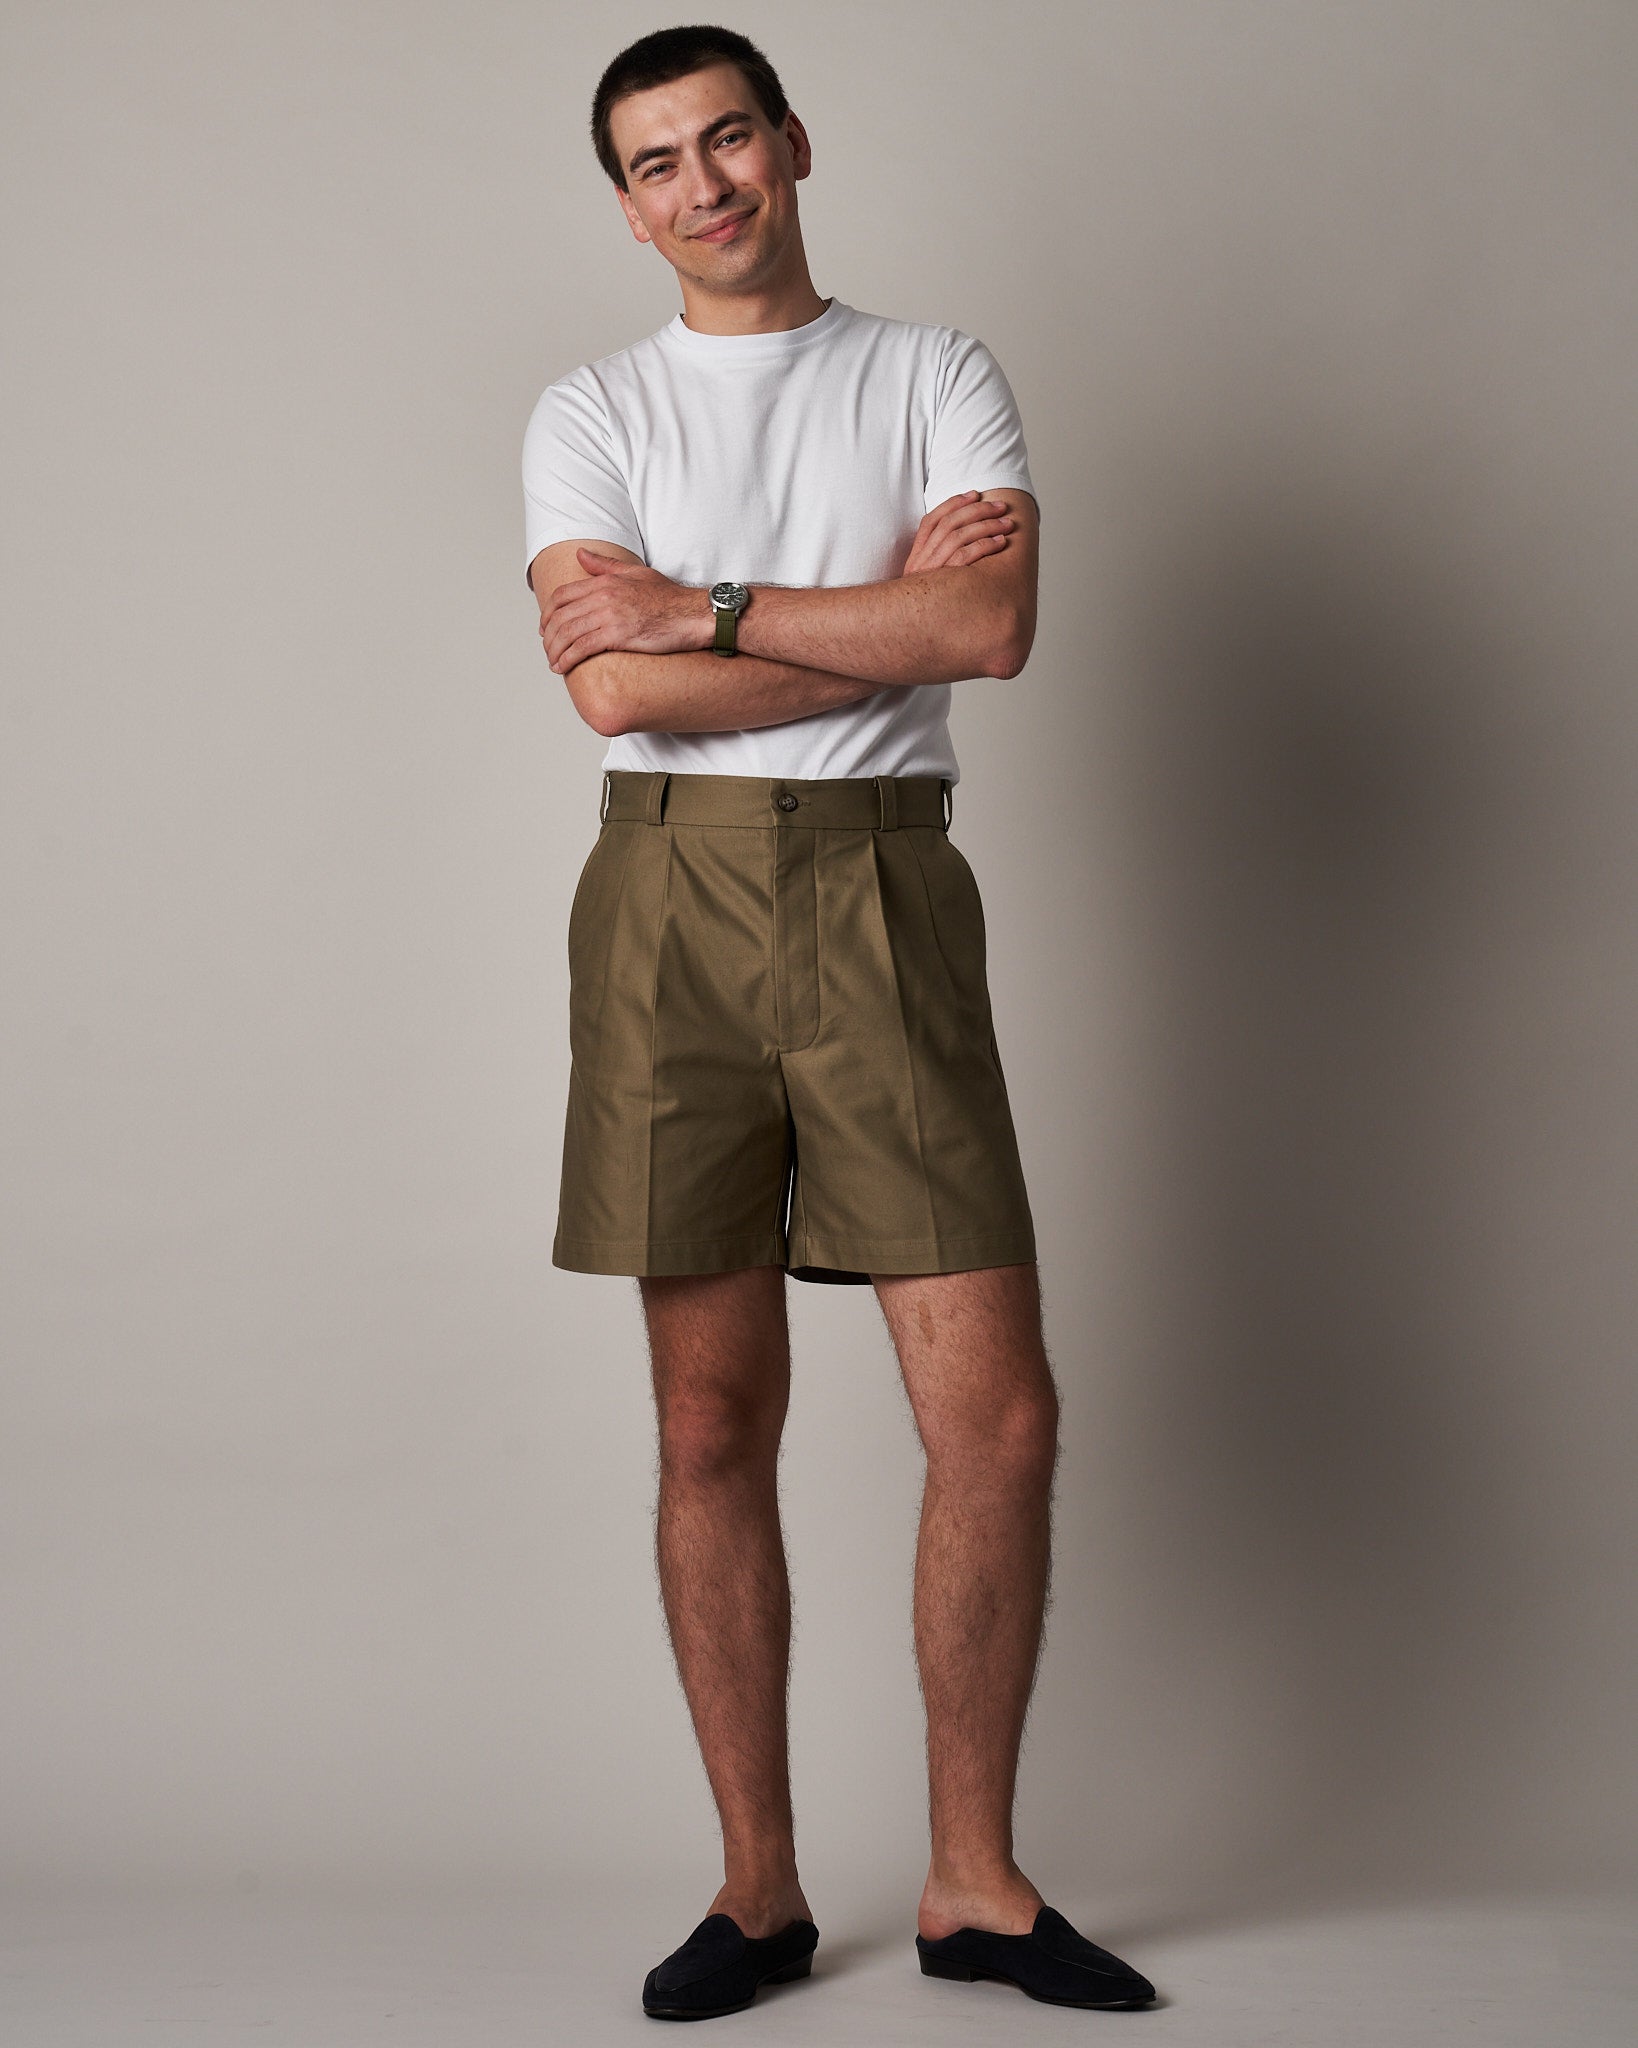 S058 Army Shorts - Drab Olive